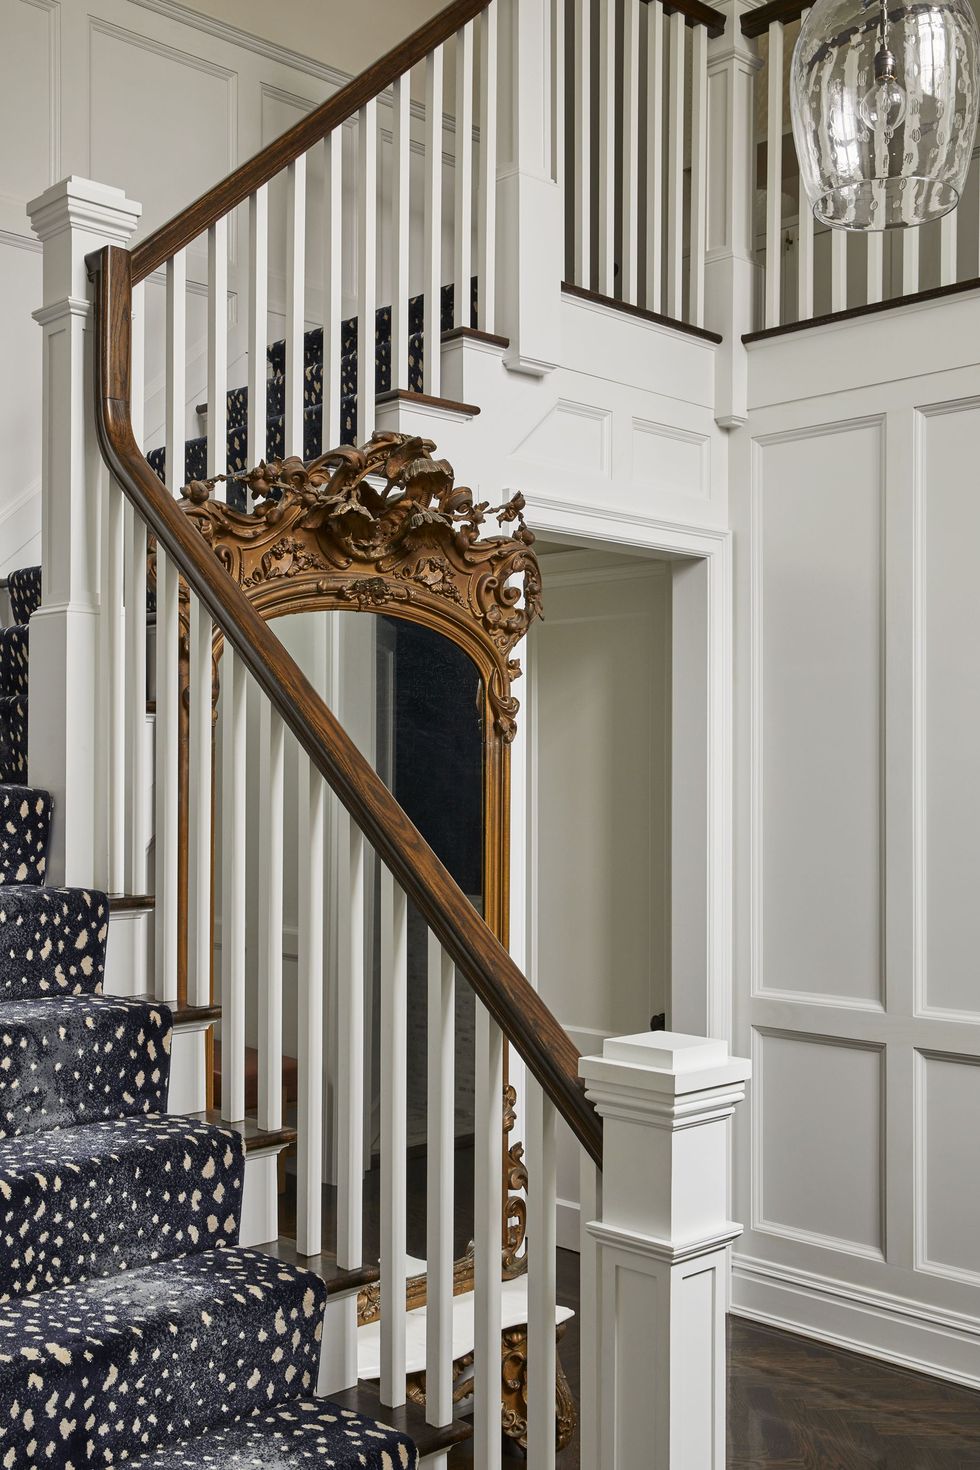 white painted walls with white crown moulding, stairway